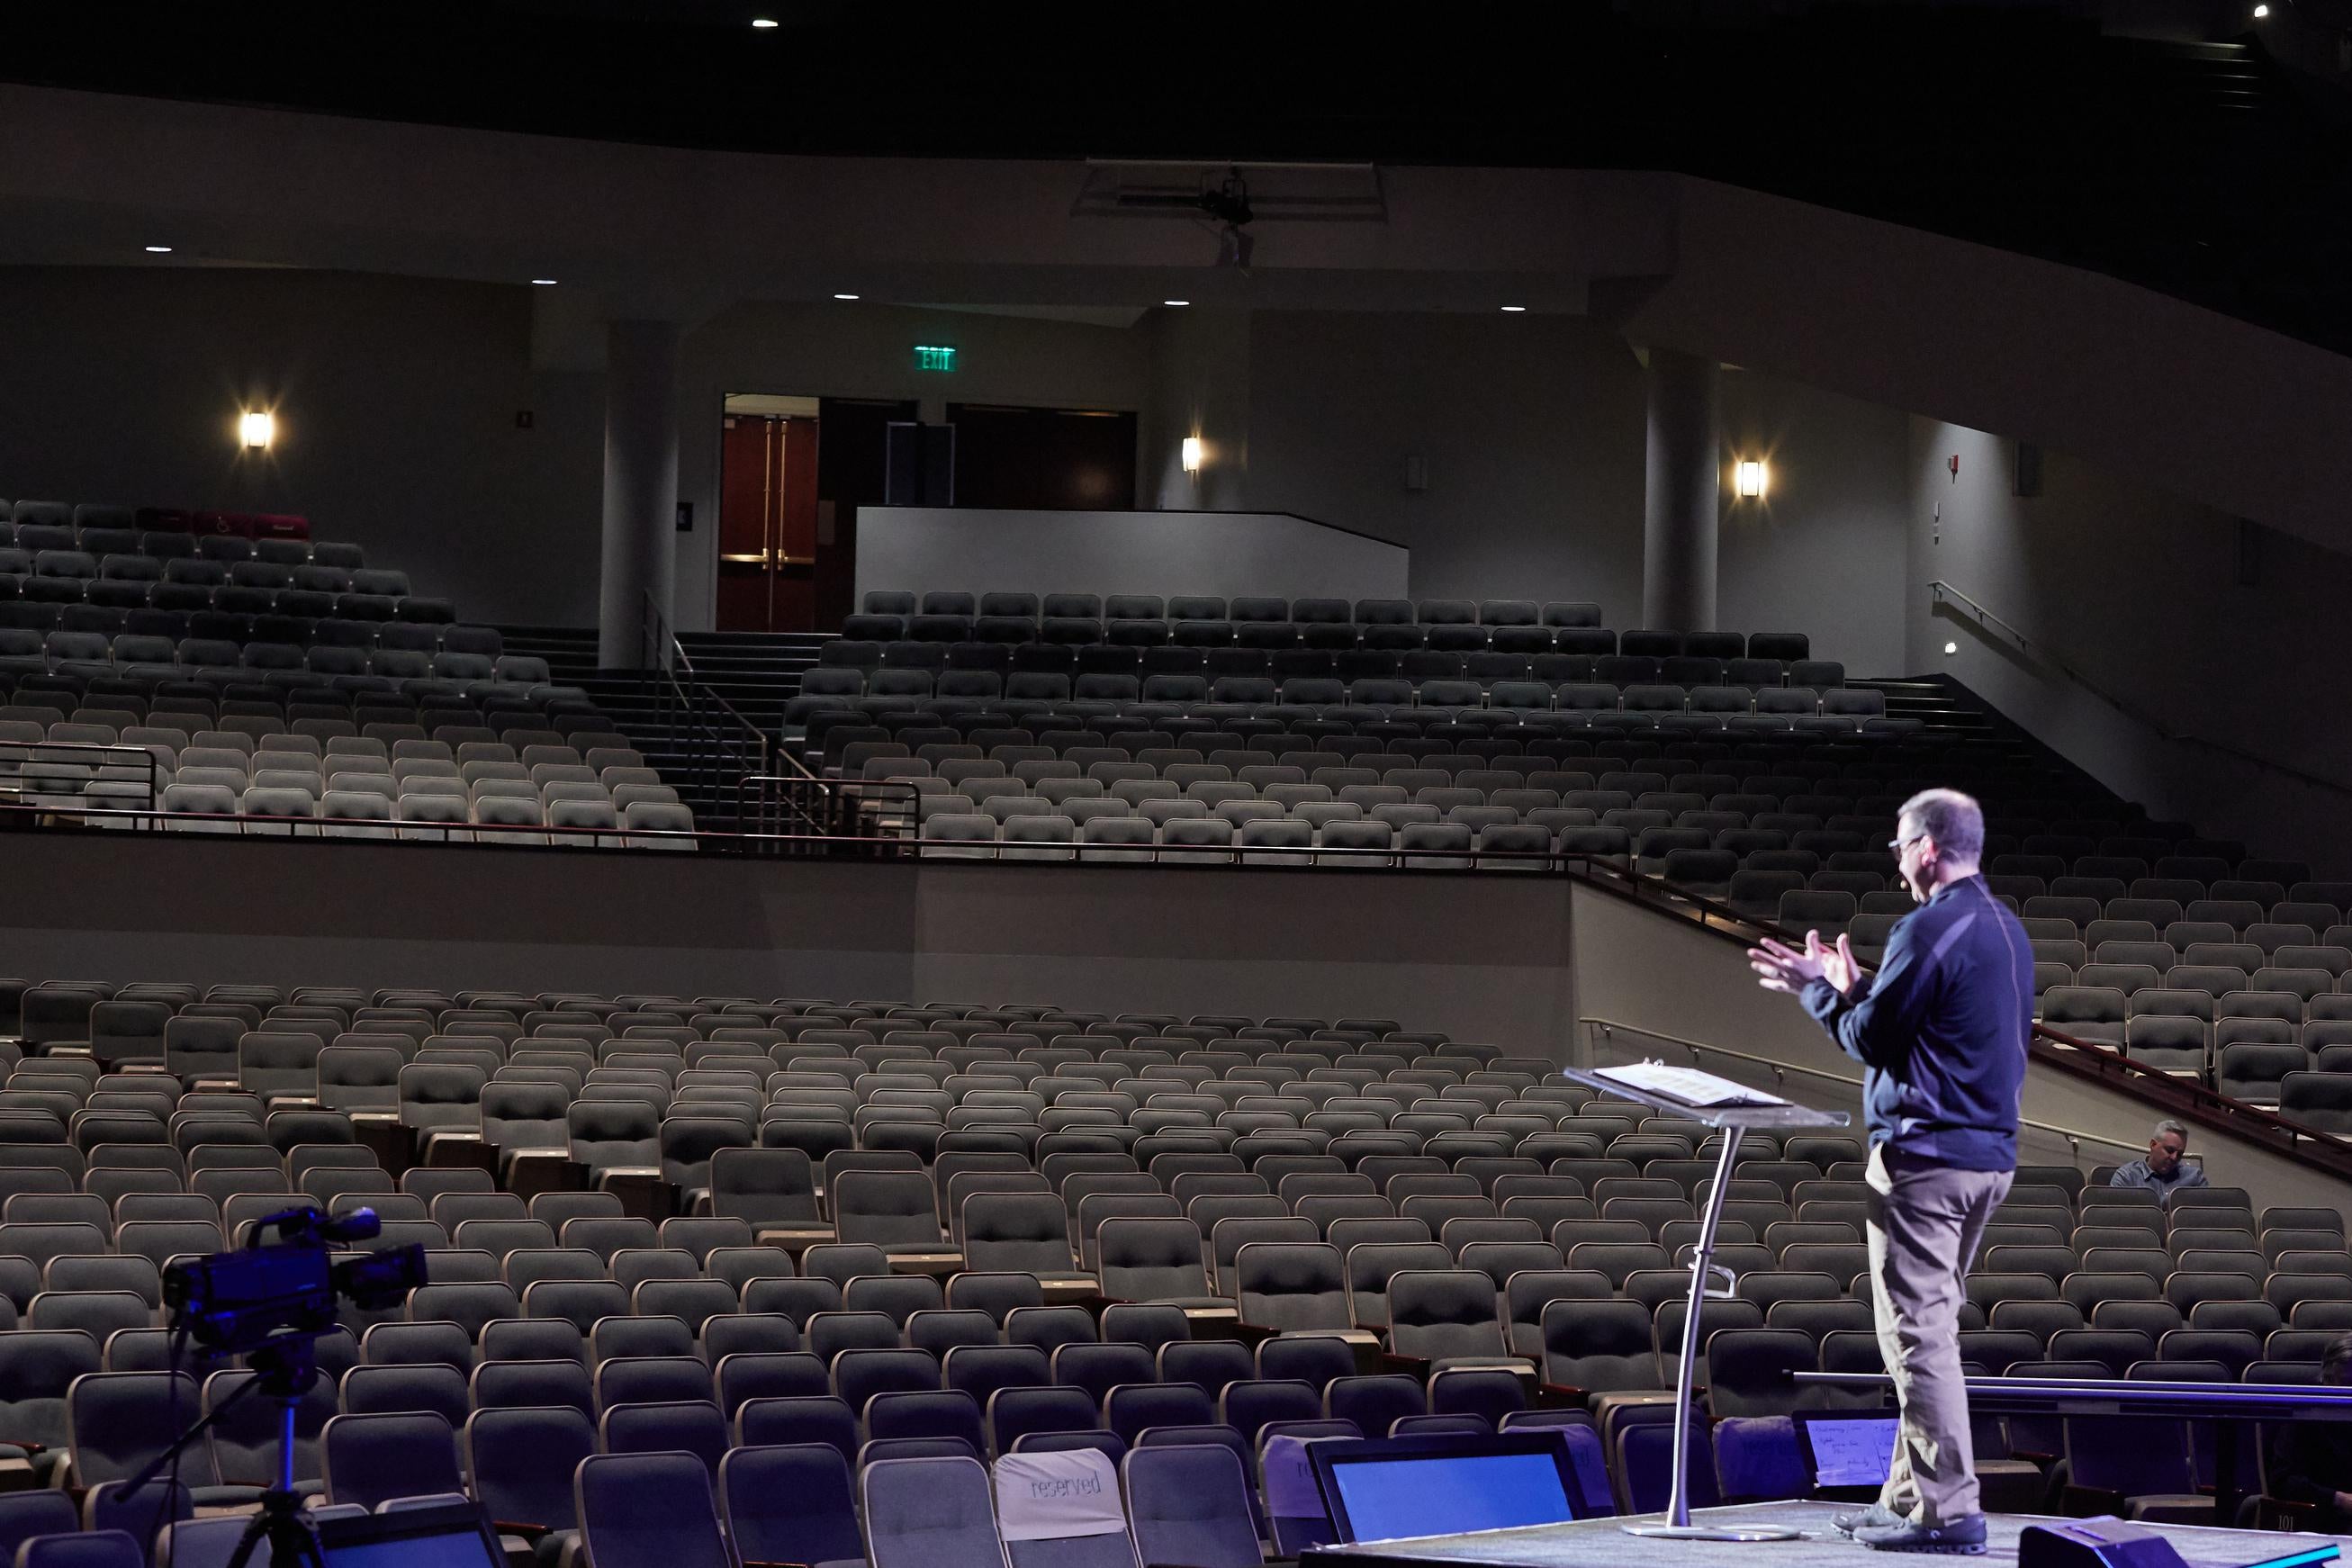 Troy Dobbs speaks at a podium before an empty auditorium.